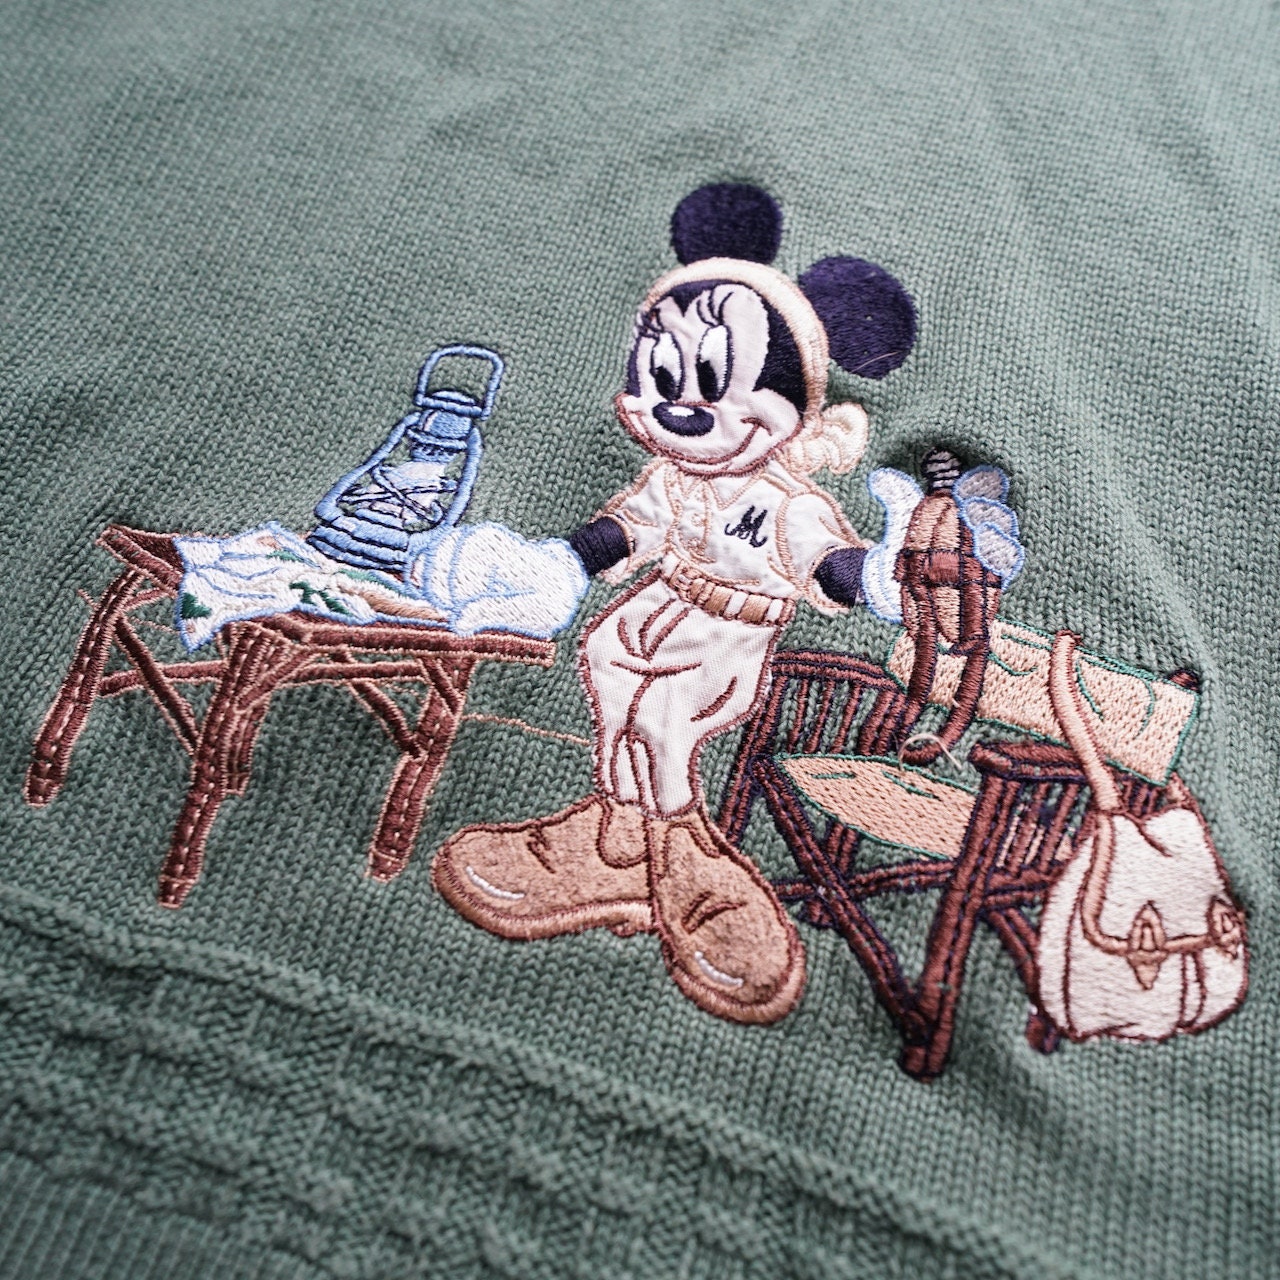 Vintage Donaldson Disney Pullover Size M green cotton sweater embroidery minnie mouse